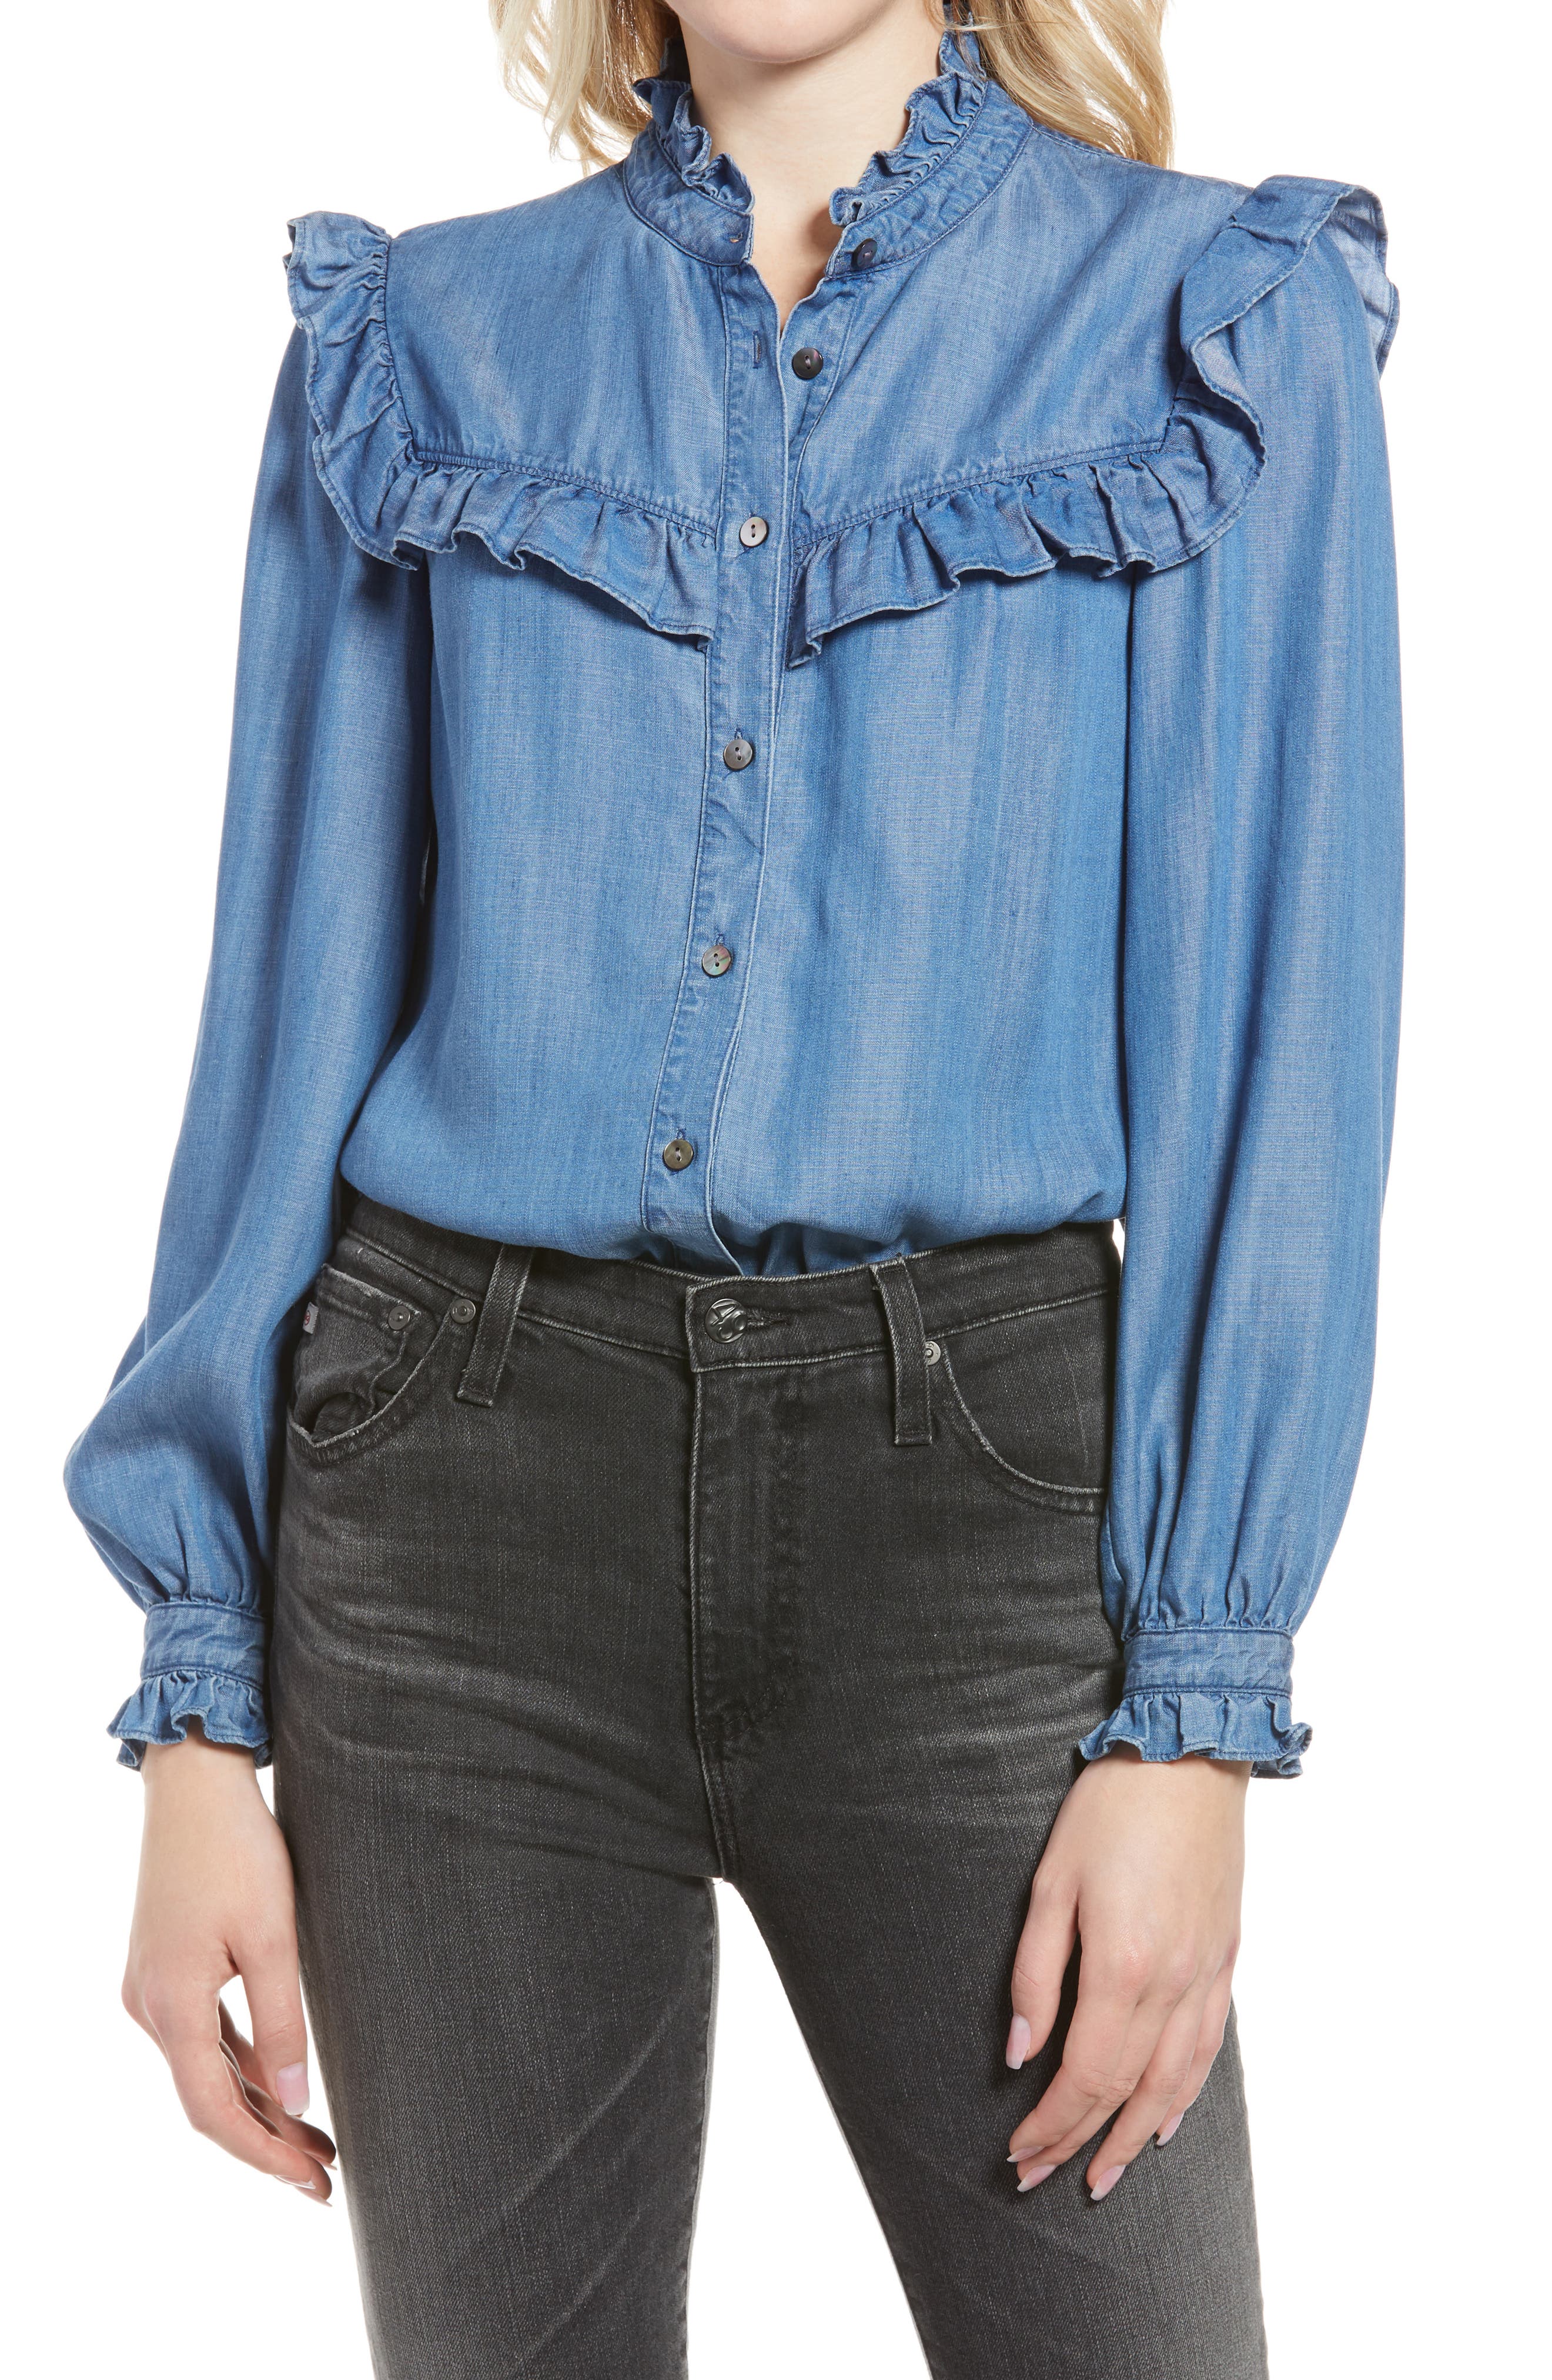 Rebecca Minkoff Linda Ruffle Chambray Button-Up Top in Medium Wash Blue at Nordstrom, Size X-Small